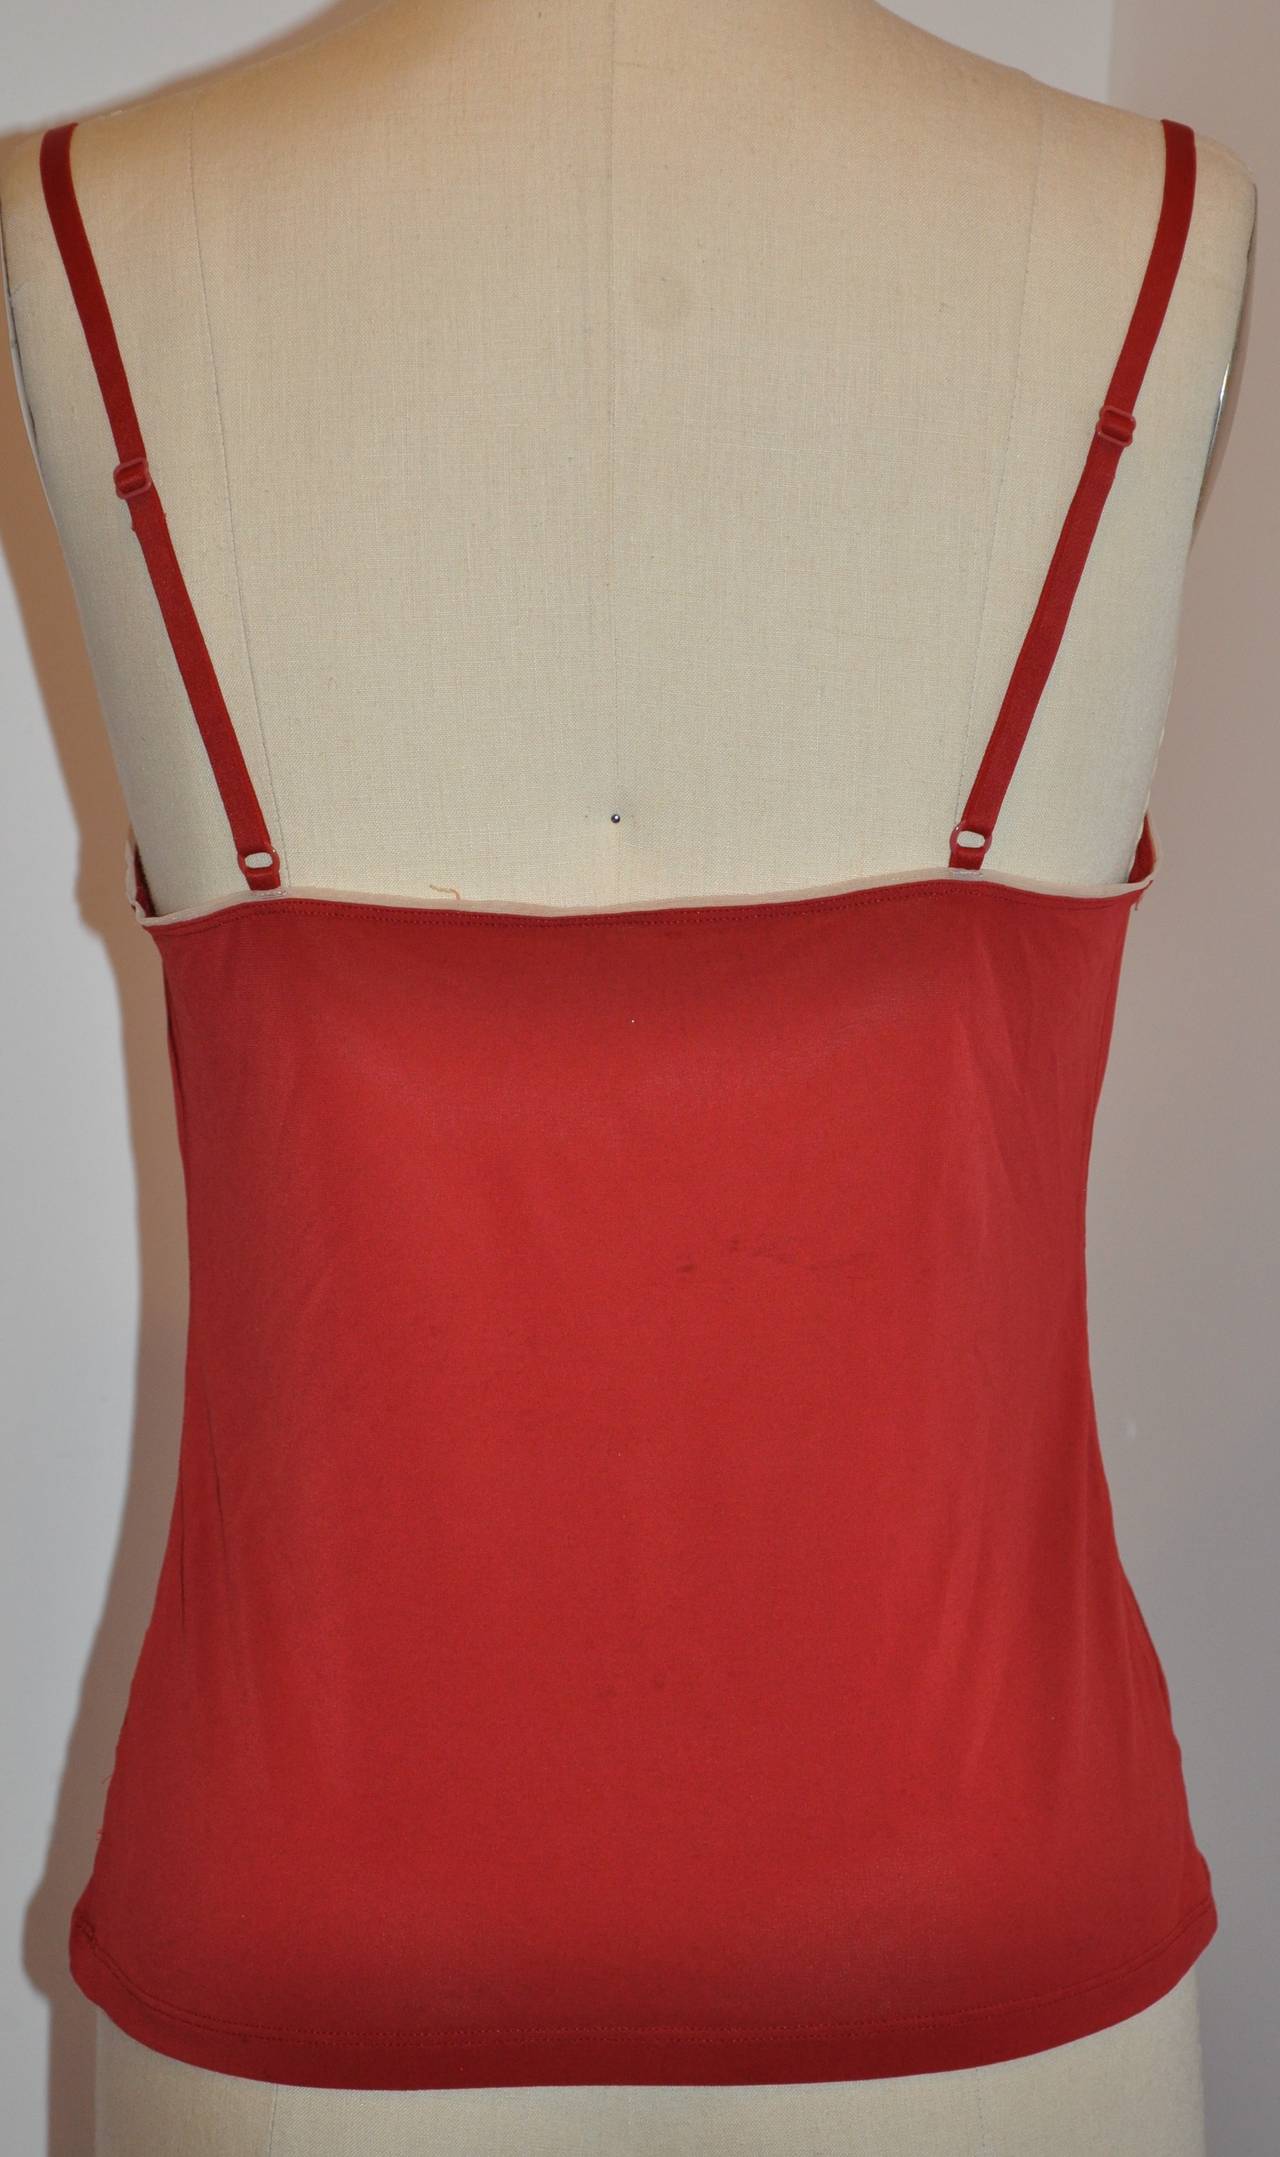 ERES Brick-Burgundy Camisole In Excellent Condition For Sale In New York, NY